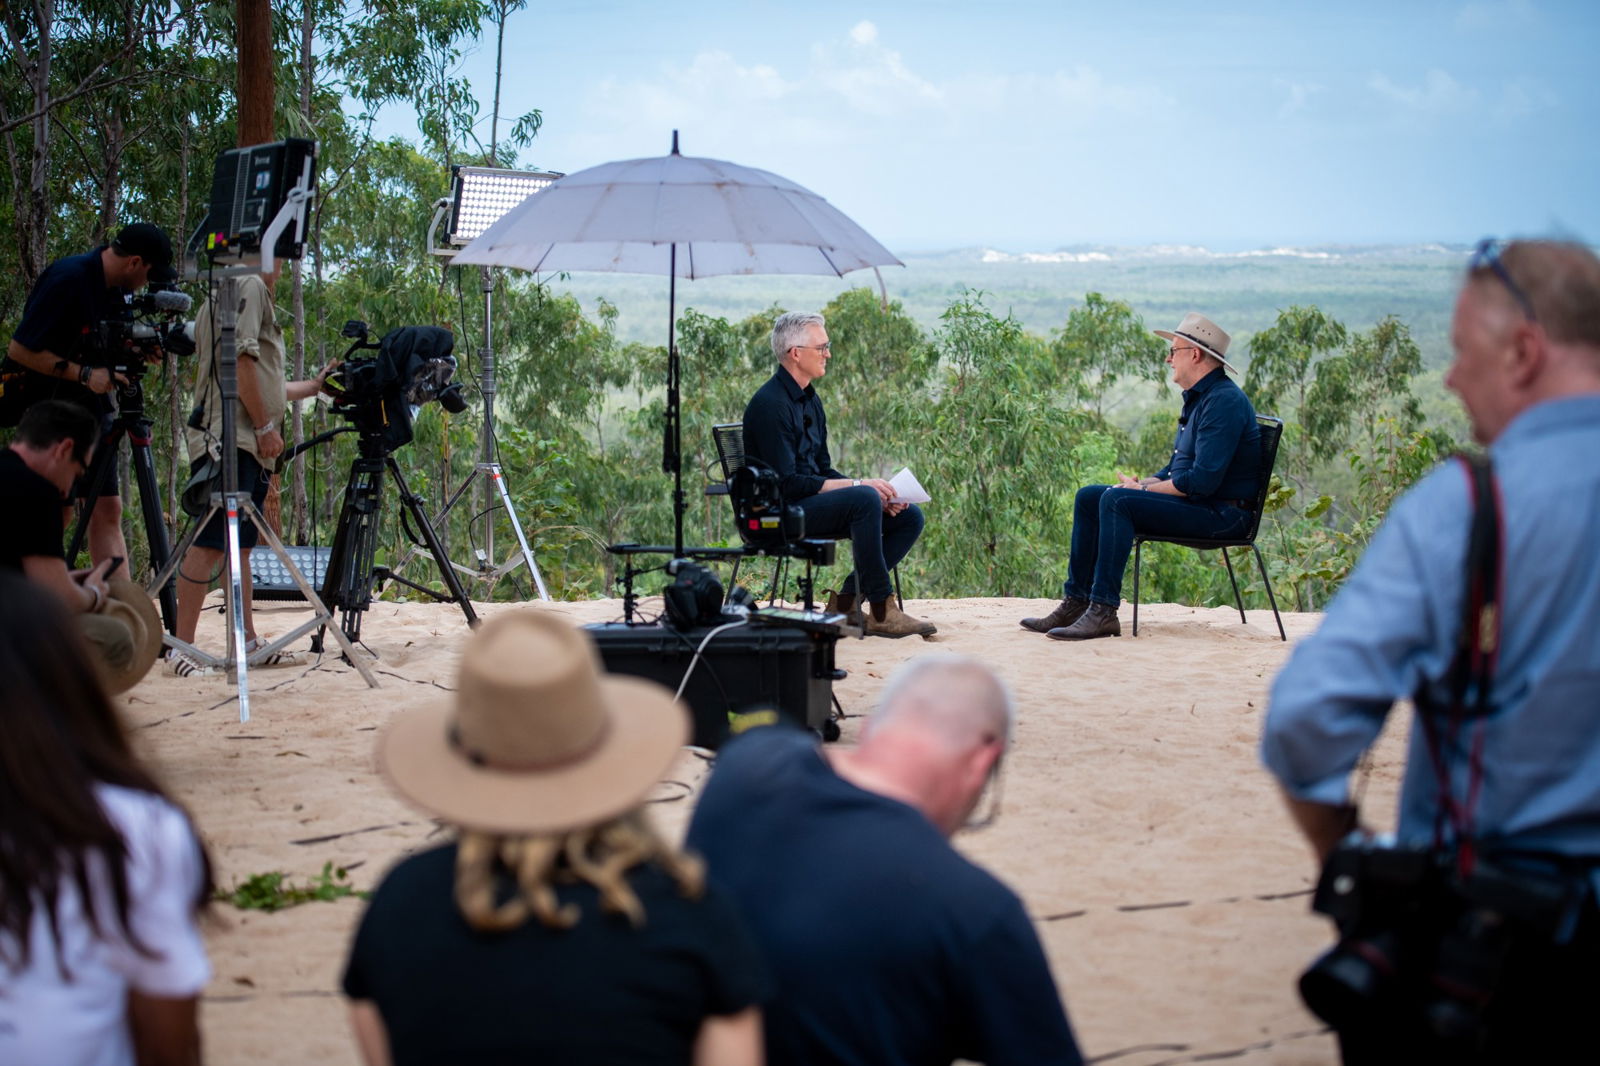 A TV interview set with the PM and David Speers, overlooking a bush vista.